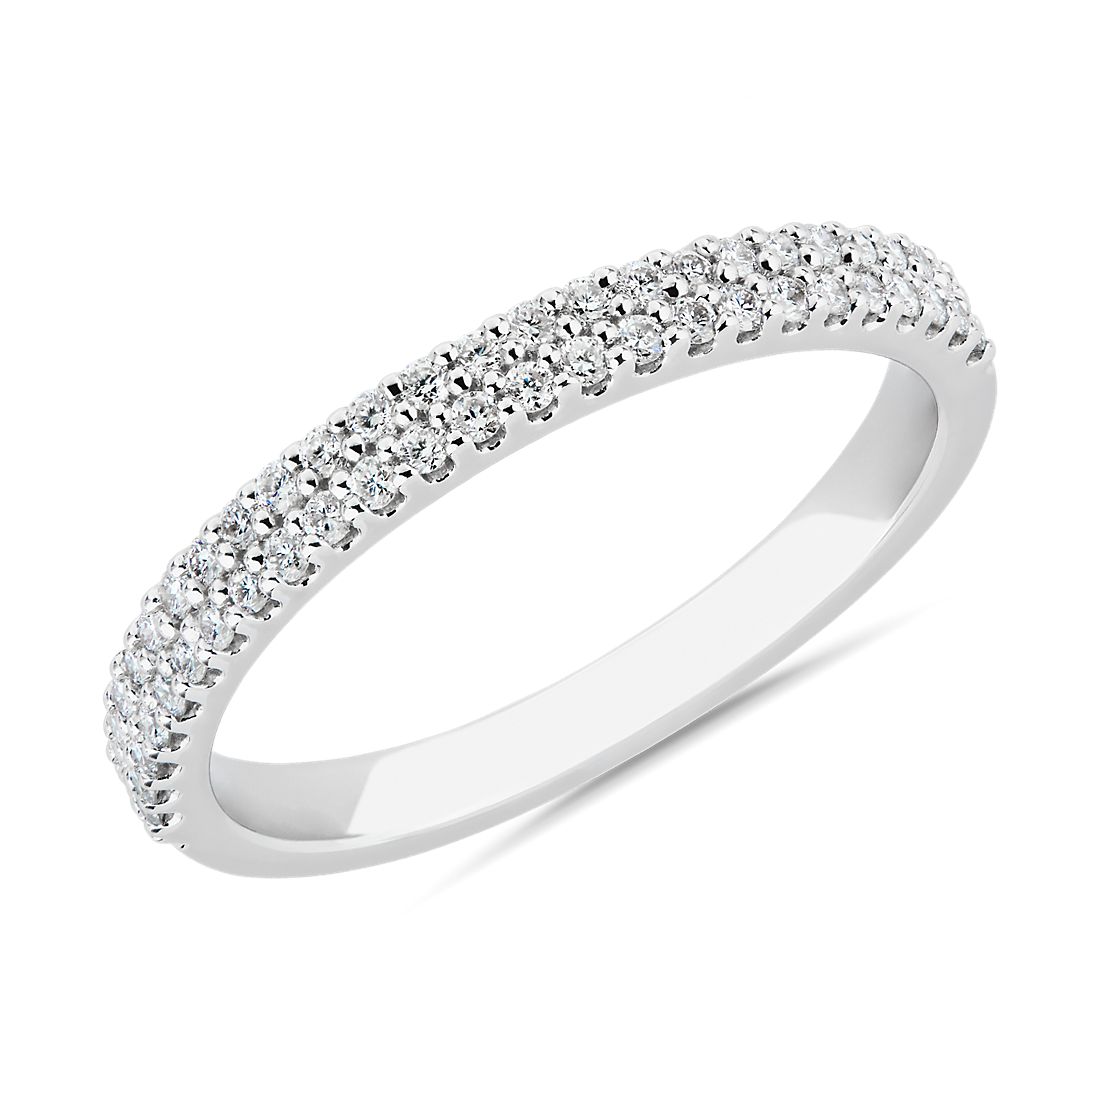 Two Row Pave Anniversary Band in 14k White Gold (0.23 ct. tw.)